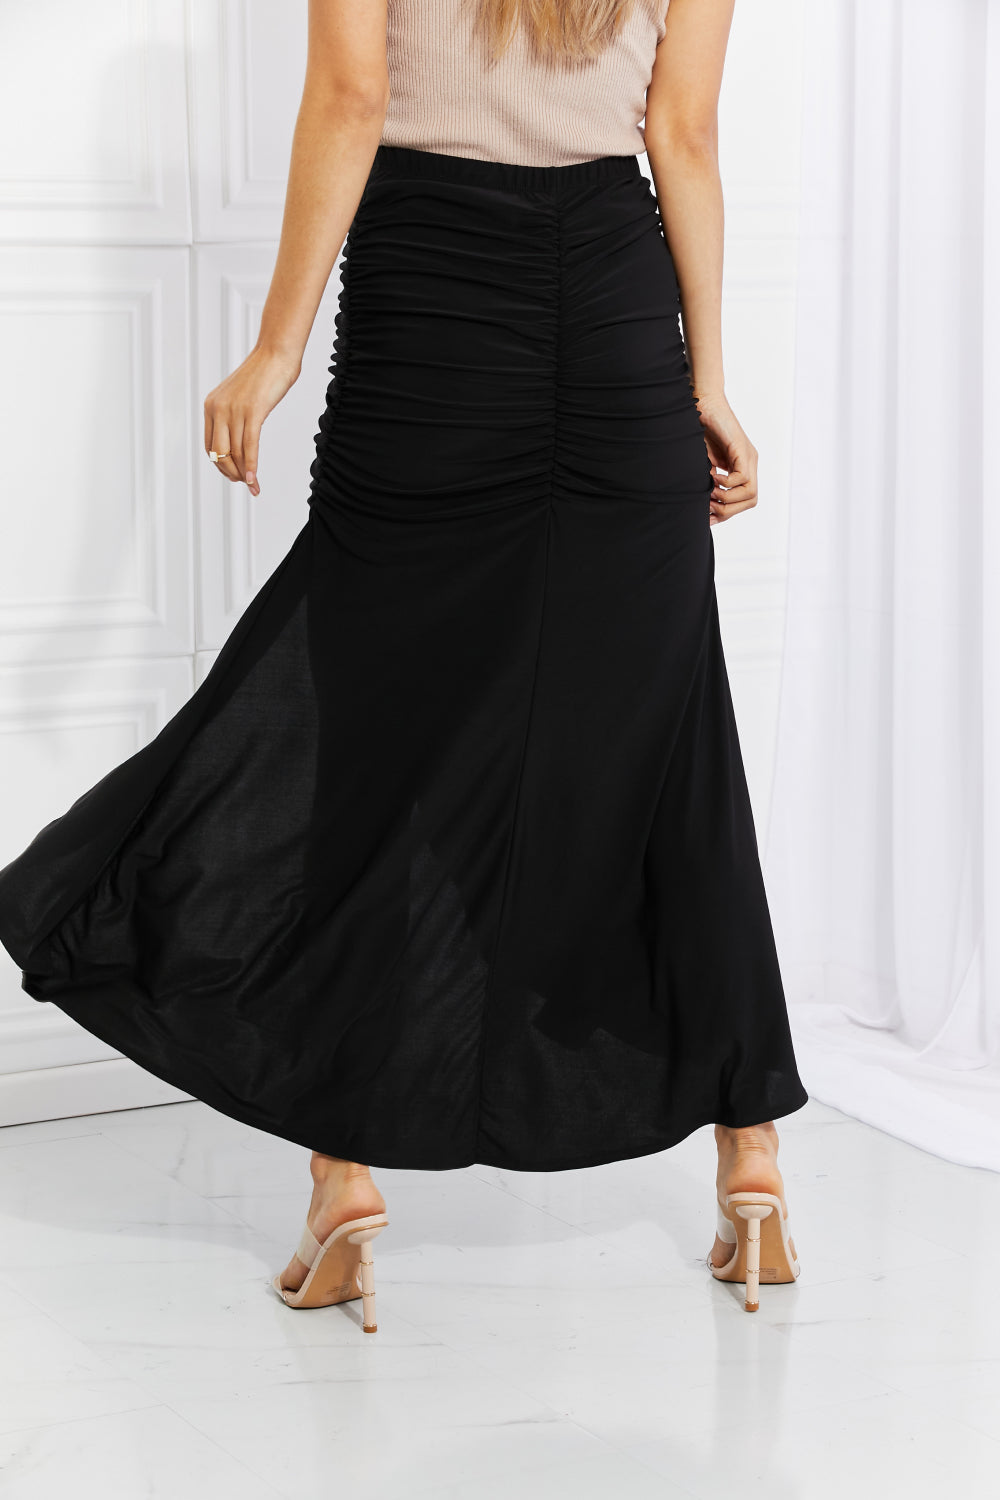 Show him what you working with Up Ruched Slit Maxi Skirt